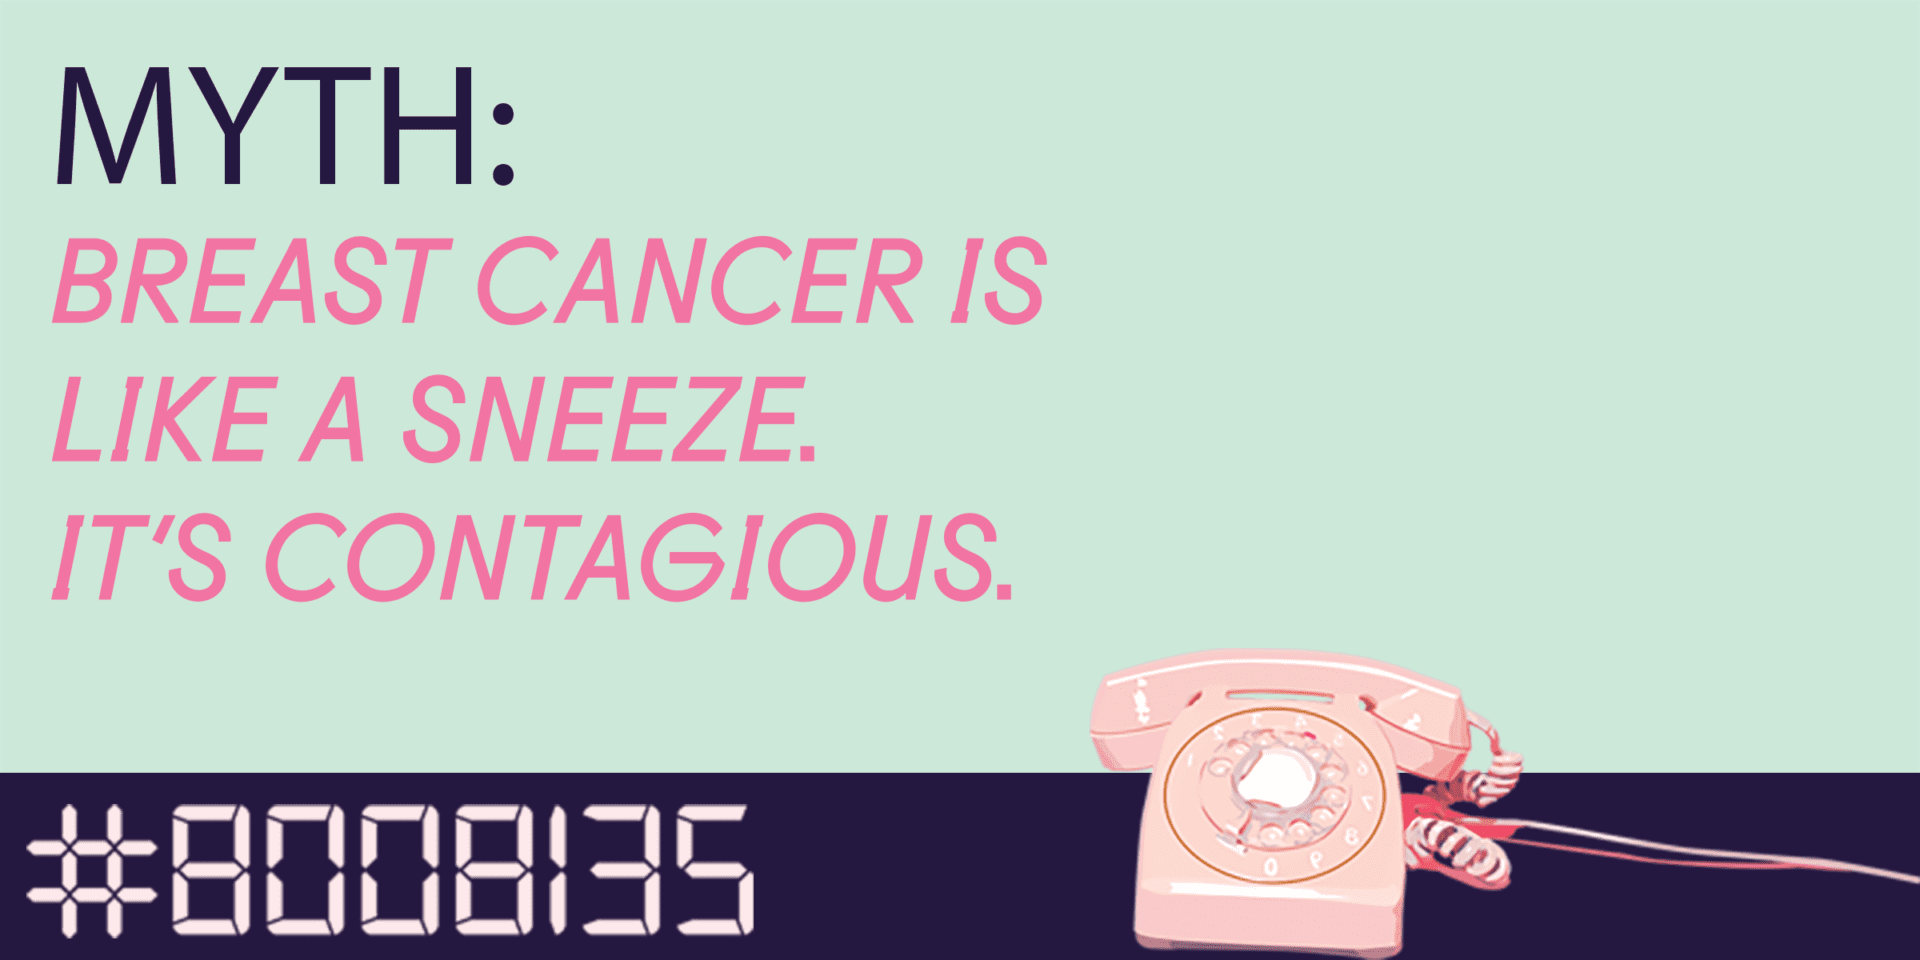 Myth: Breast cancer is like a sneeze. It